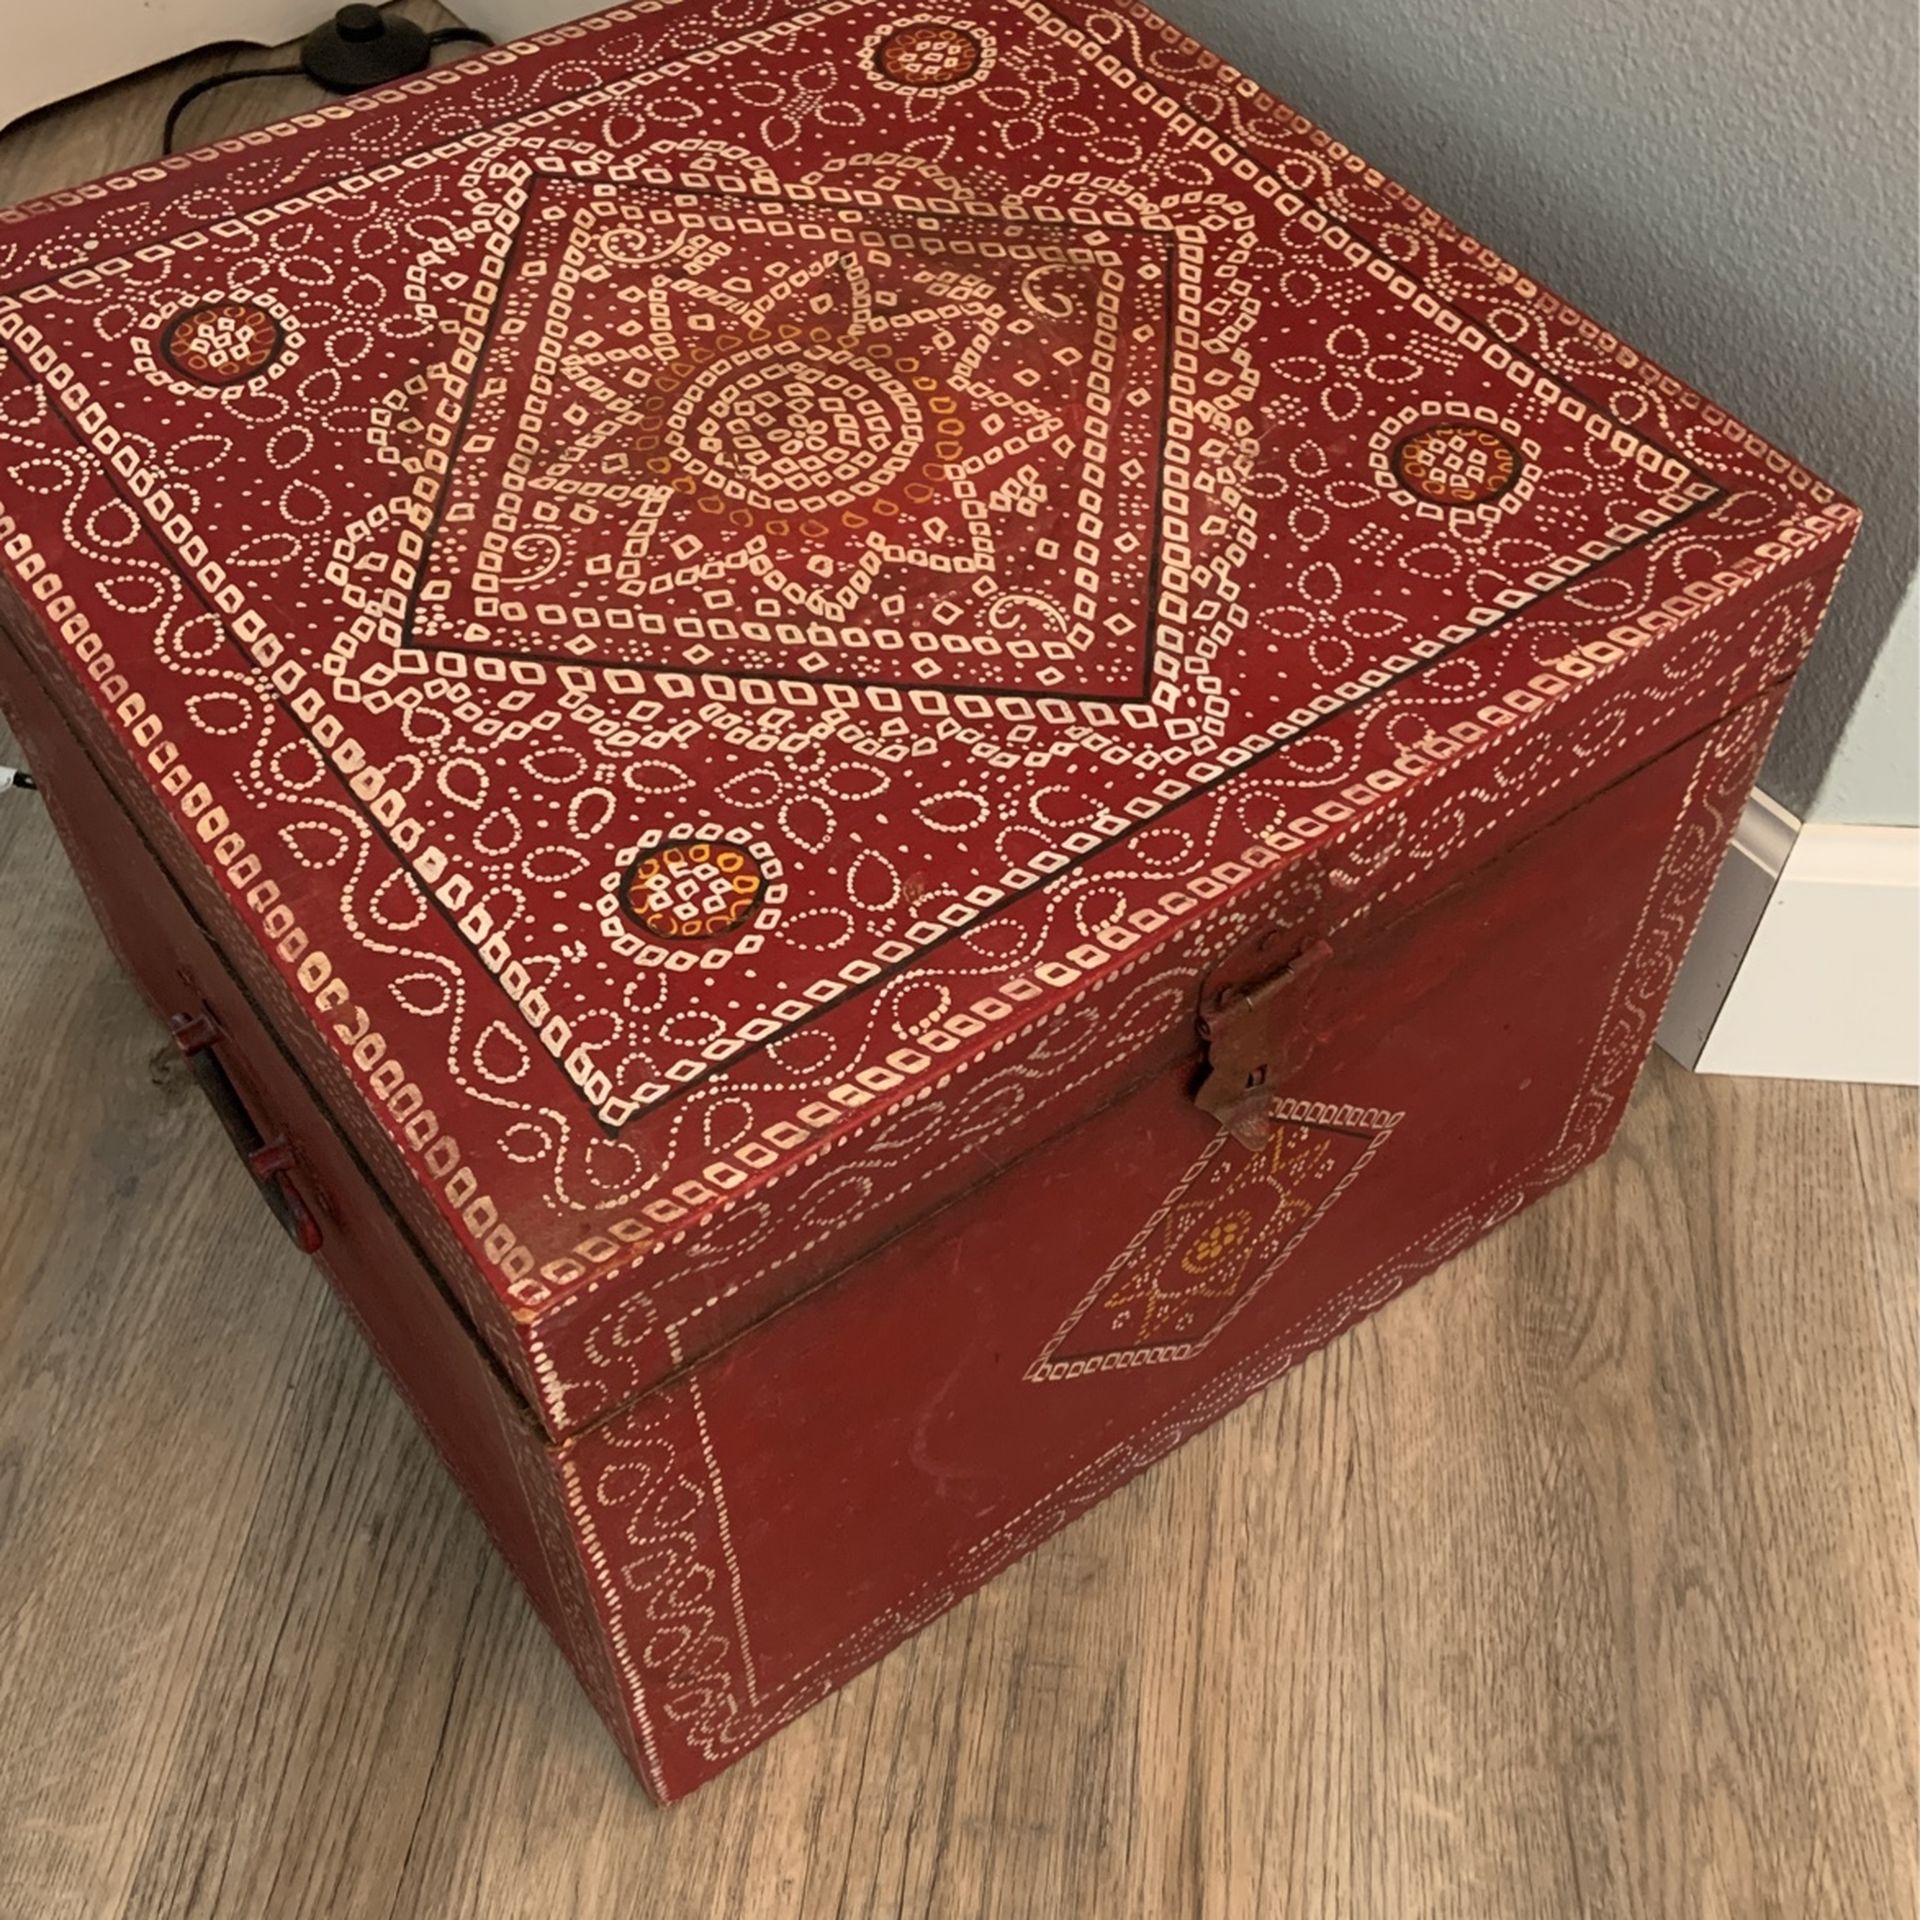 Decorative Handcrafted Hand painted Wood Box